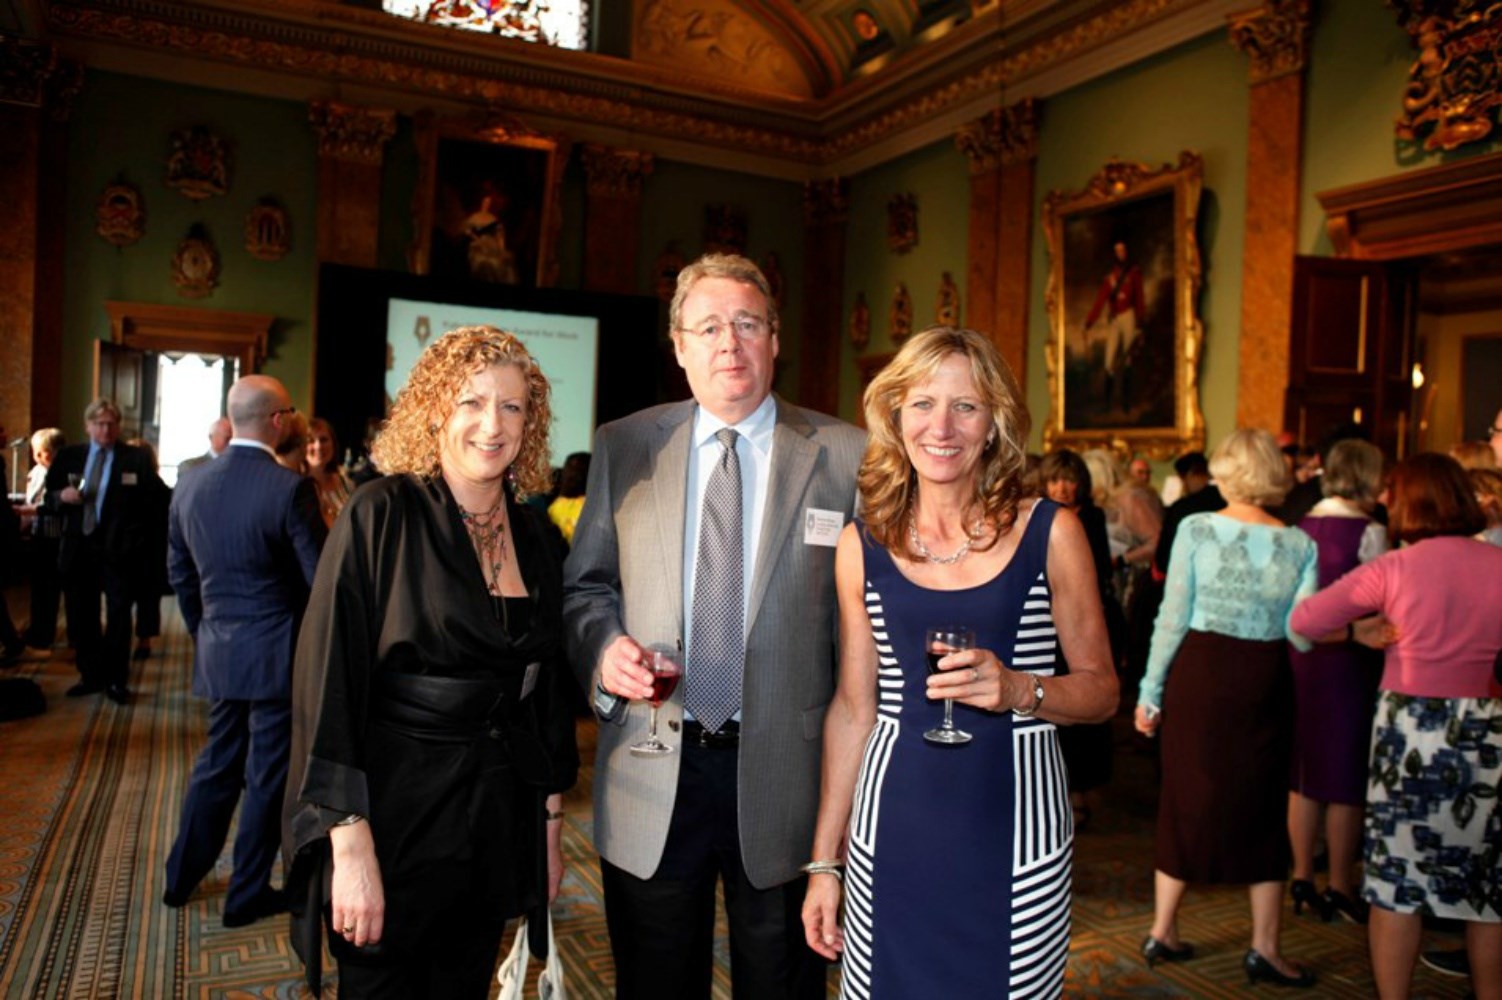 From left to right: Ailbhe Fallon, Andrew Brown (from sponsors the Alaska Seafood Marketing Institute) and Cherry Haigh (from Alaska's PR agency the Dialogue Agency) in the Banqueting Hall